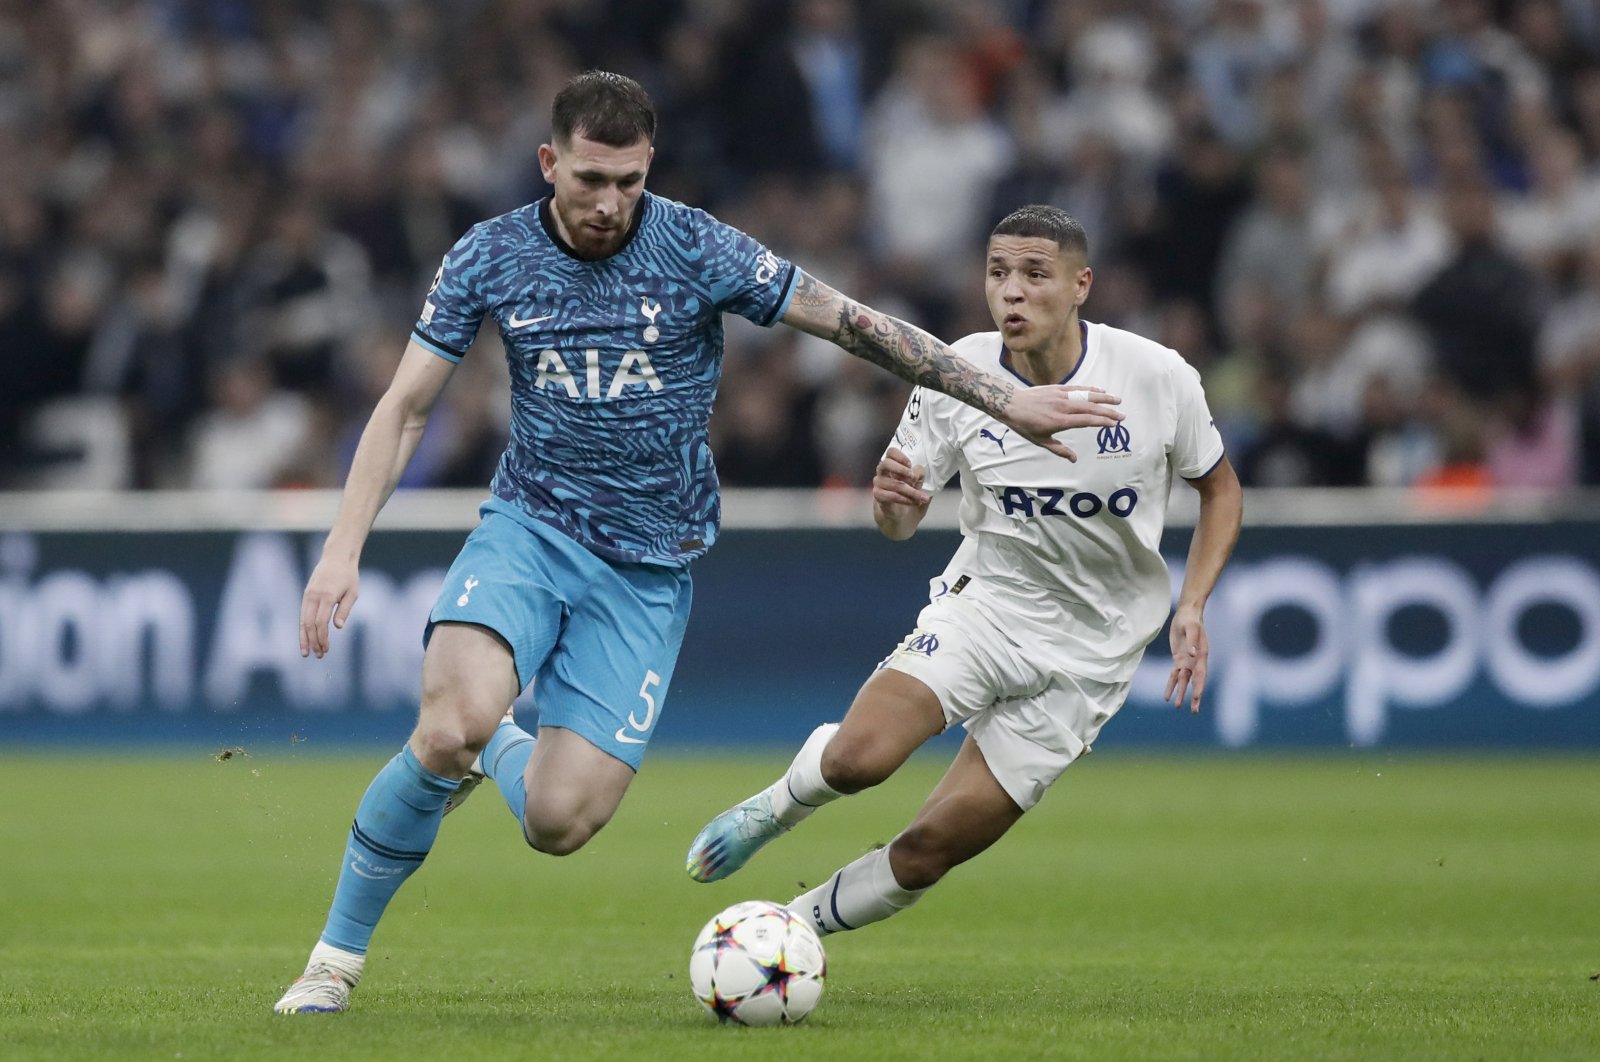 Tottenham&#039;s Pierre-Emile Hojbjerg (L) and Marseille&#039;s Amine Harit in action during the UEFA Champions League Group D football match between Olympique Marseille and Tottenham Hotspurs, Marseille, France, Nov. 1, 2022. (EPA Photo)